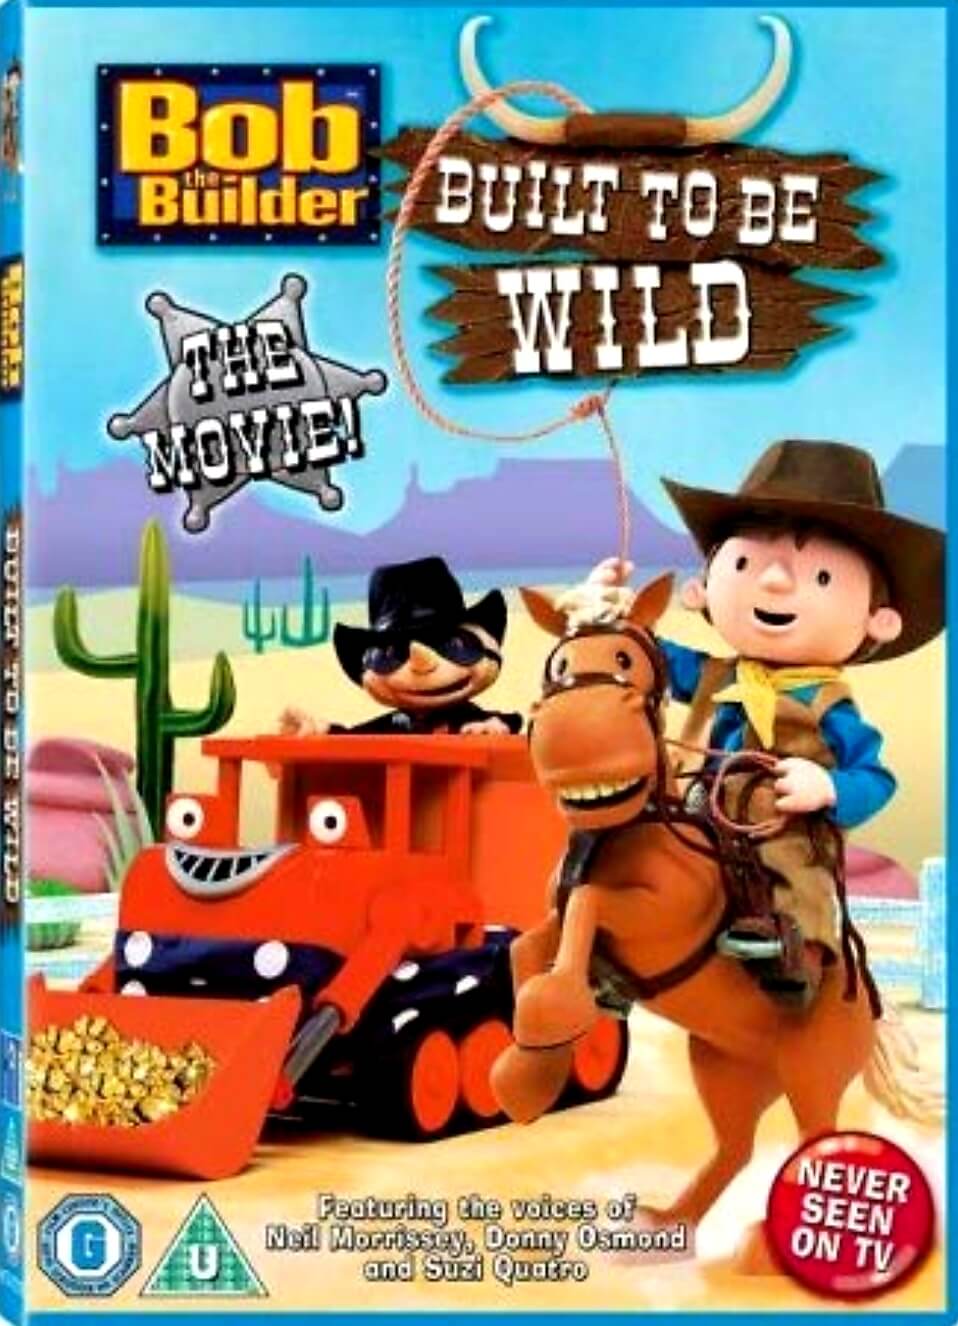 Built To Be Wild was a Bob the Builder extended one hour special,...